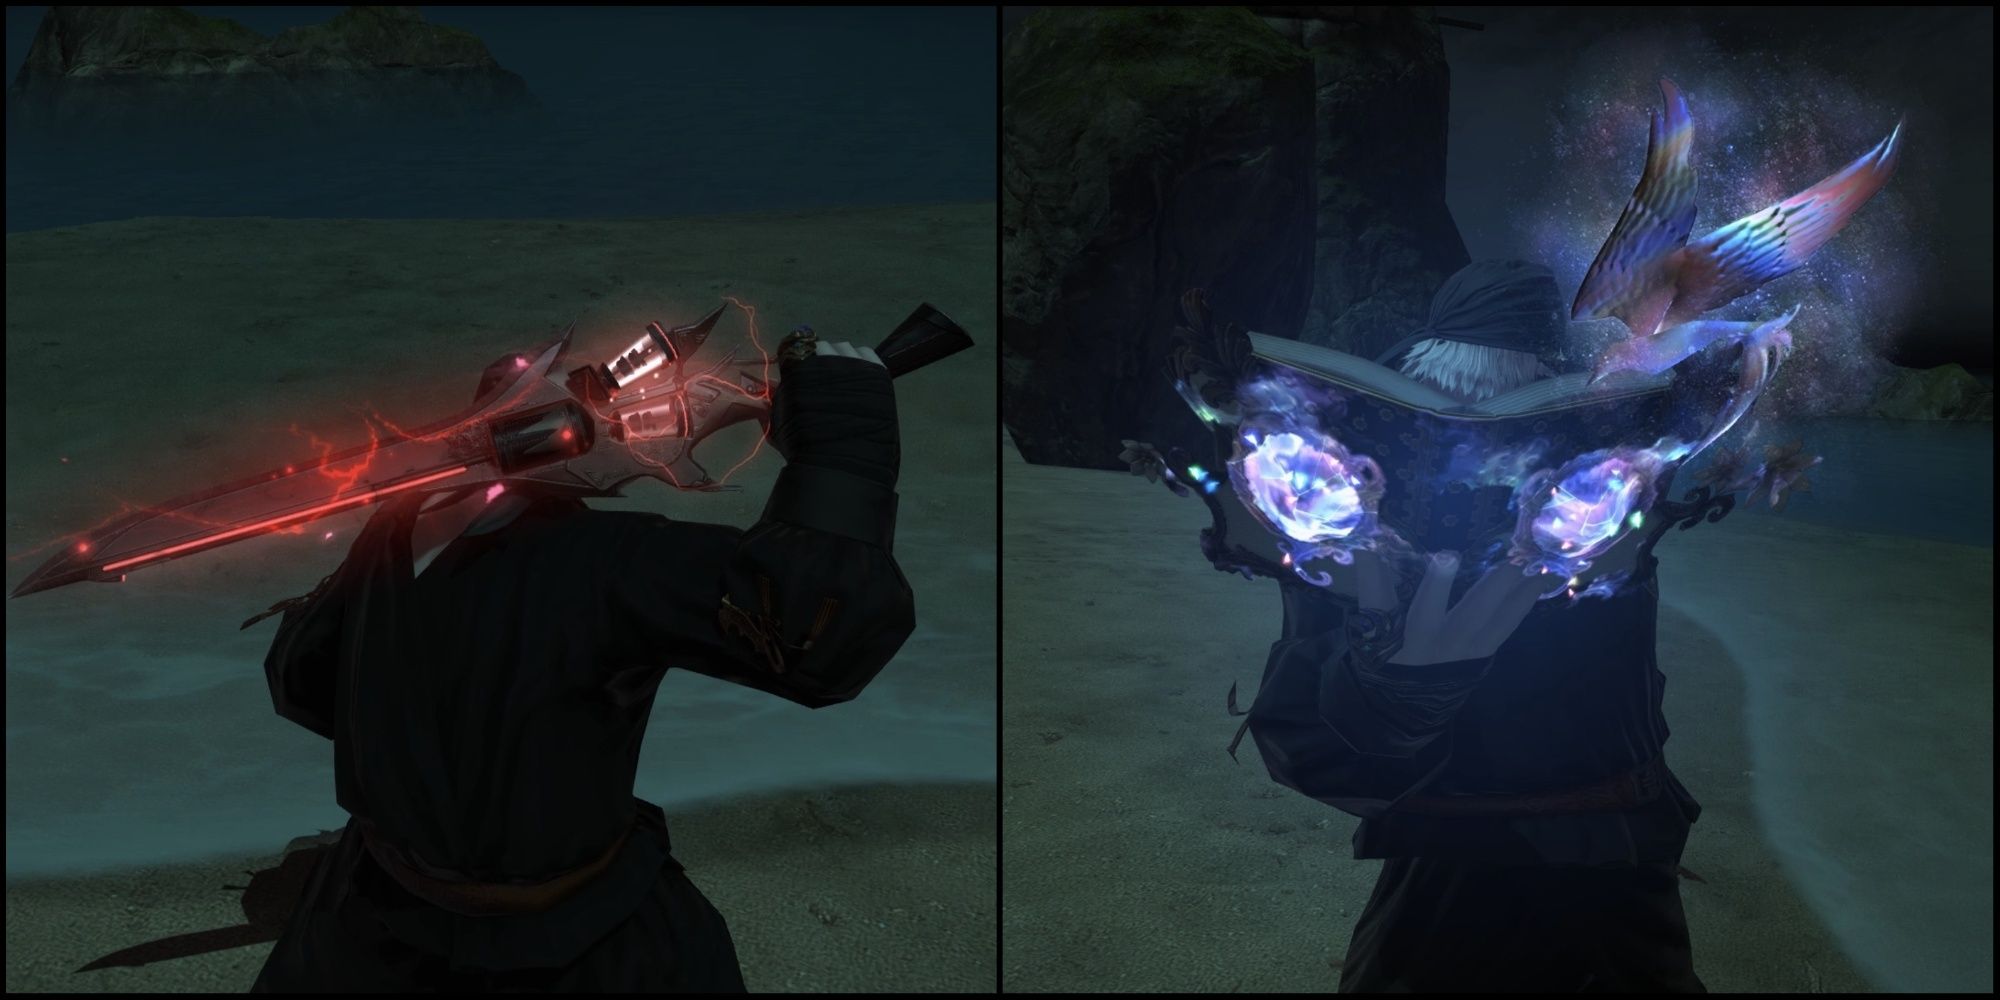 Exquisite Cerberus Fang and Encounter in Lilies in Final Fantasy 14